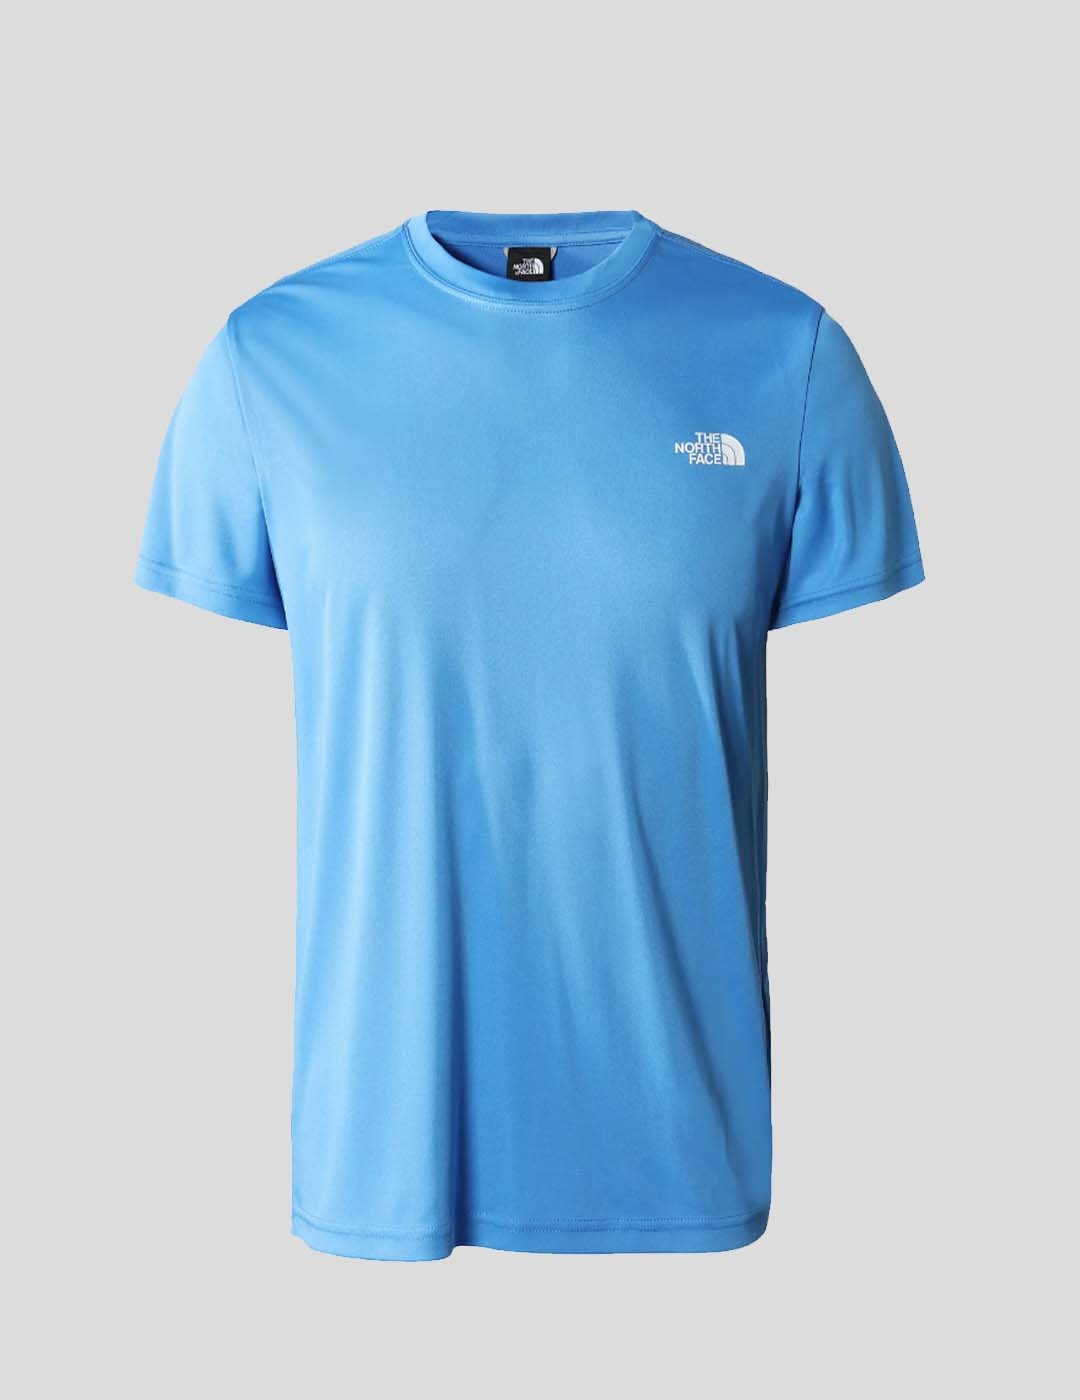 CAMISETA THE NORTH FACE RED BOX TEE  SUPER SONIC BLUE